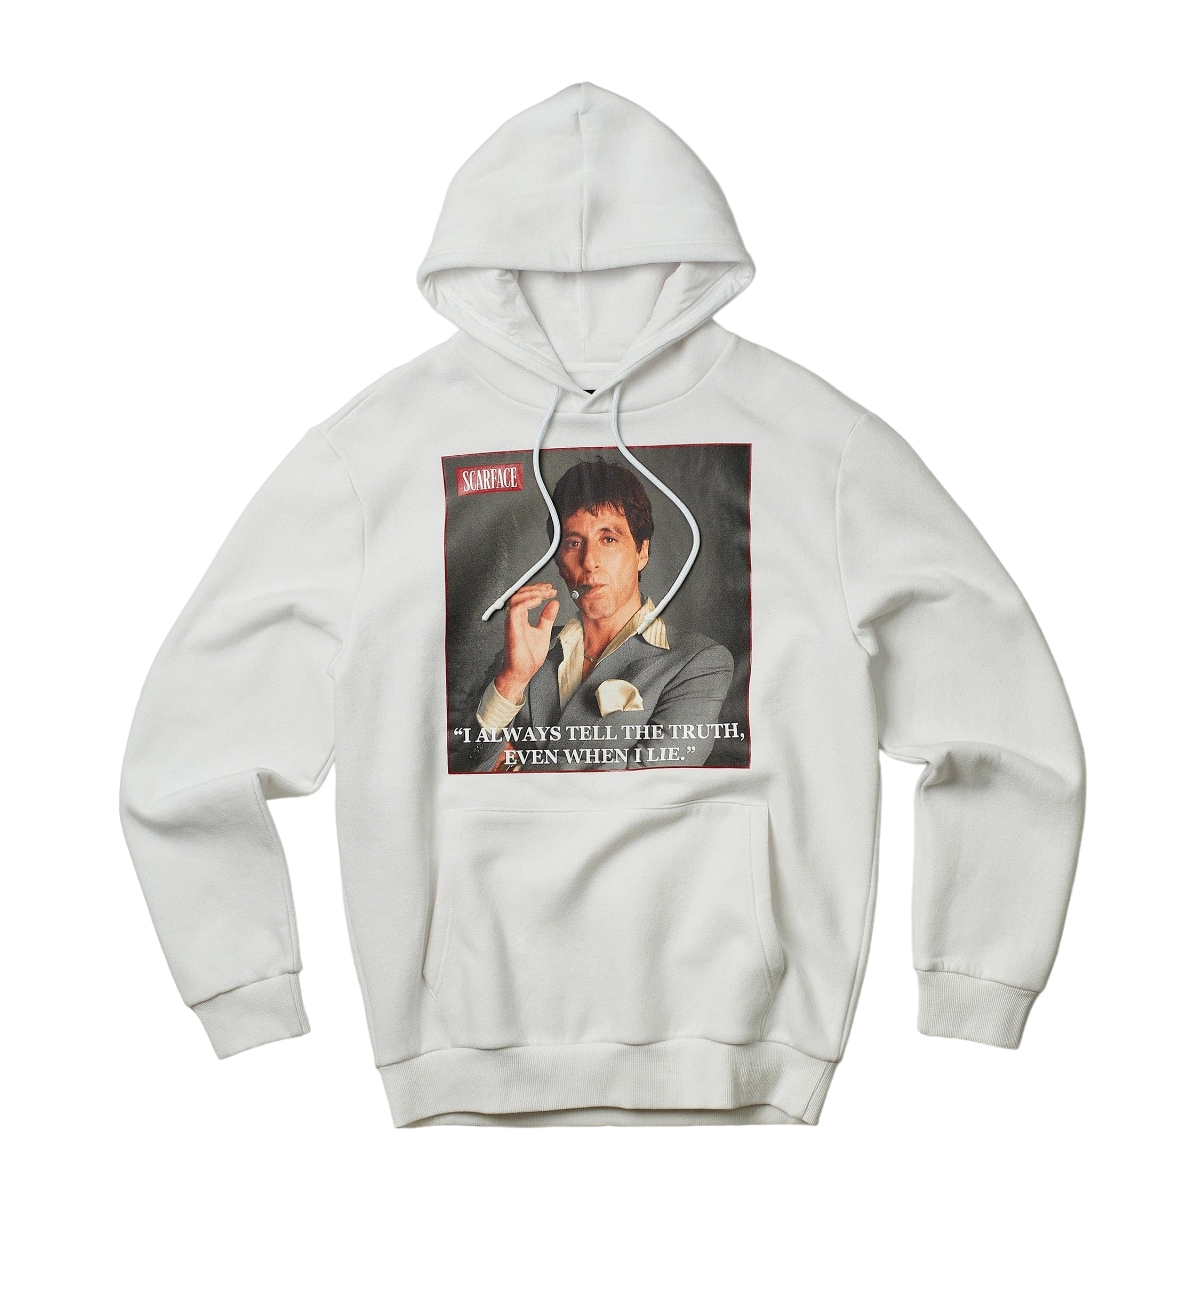 ScarfaceTruth Mens Hoodie - White